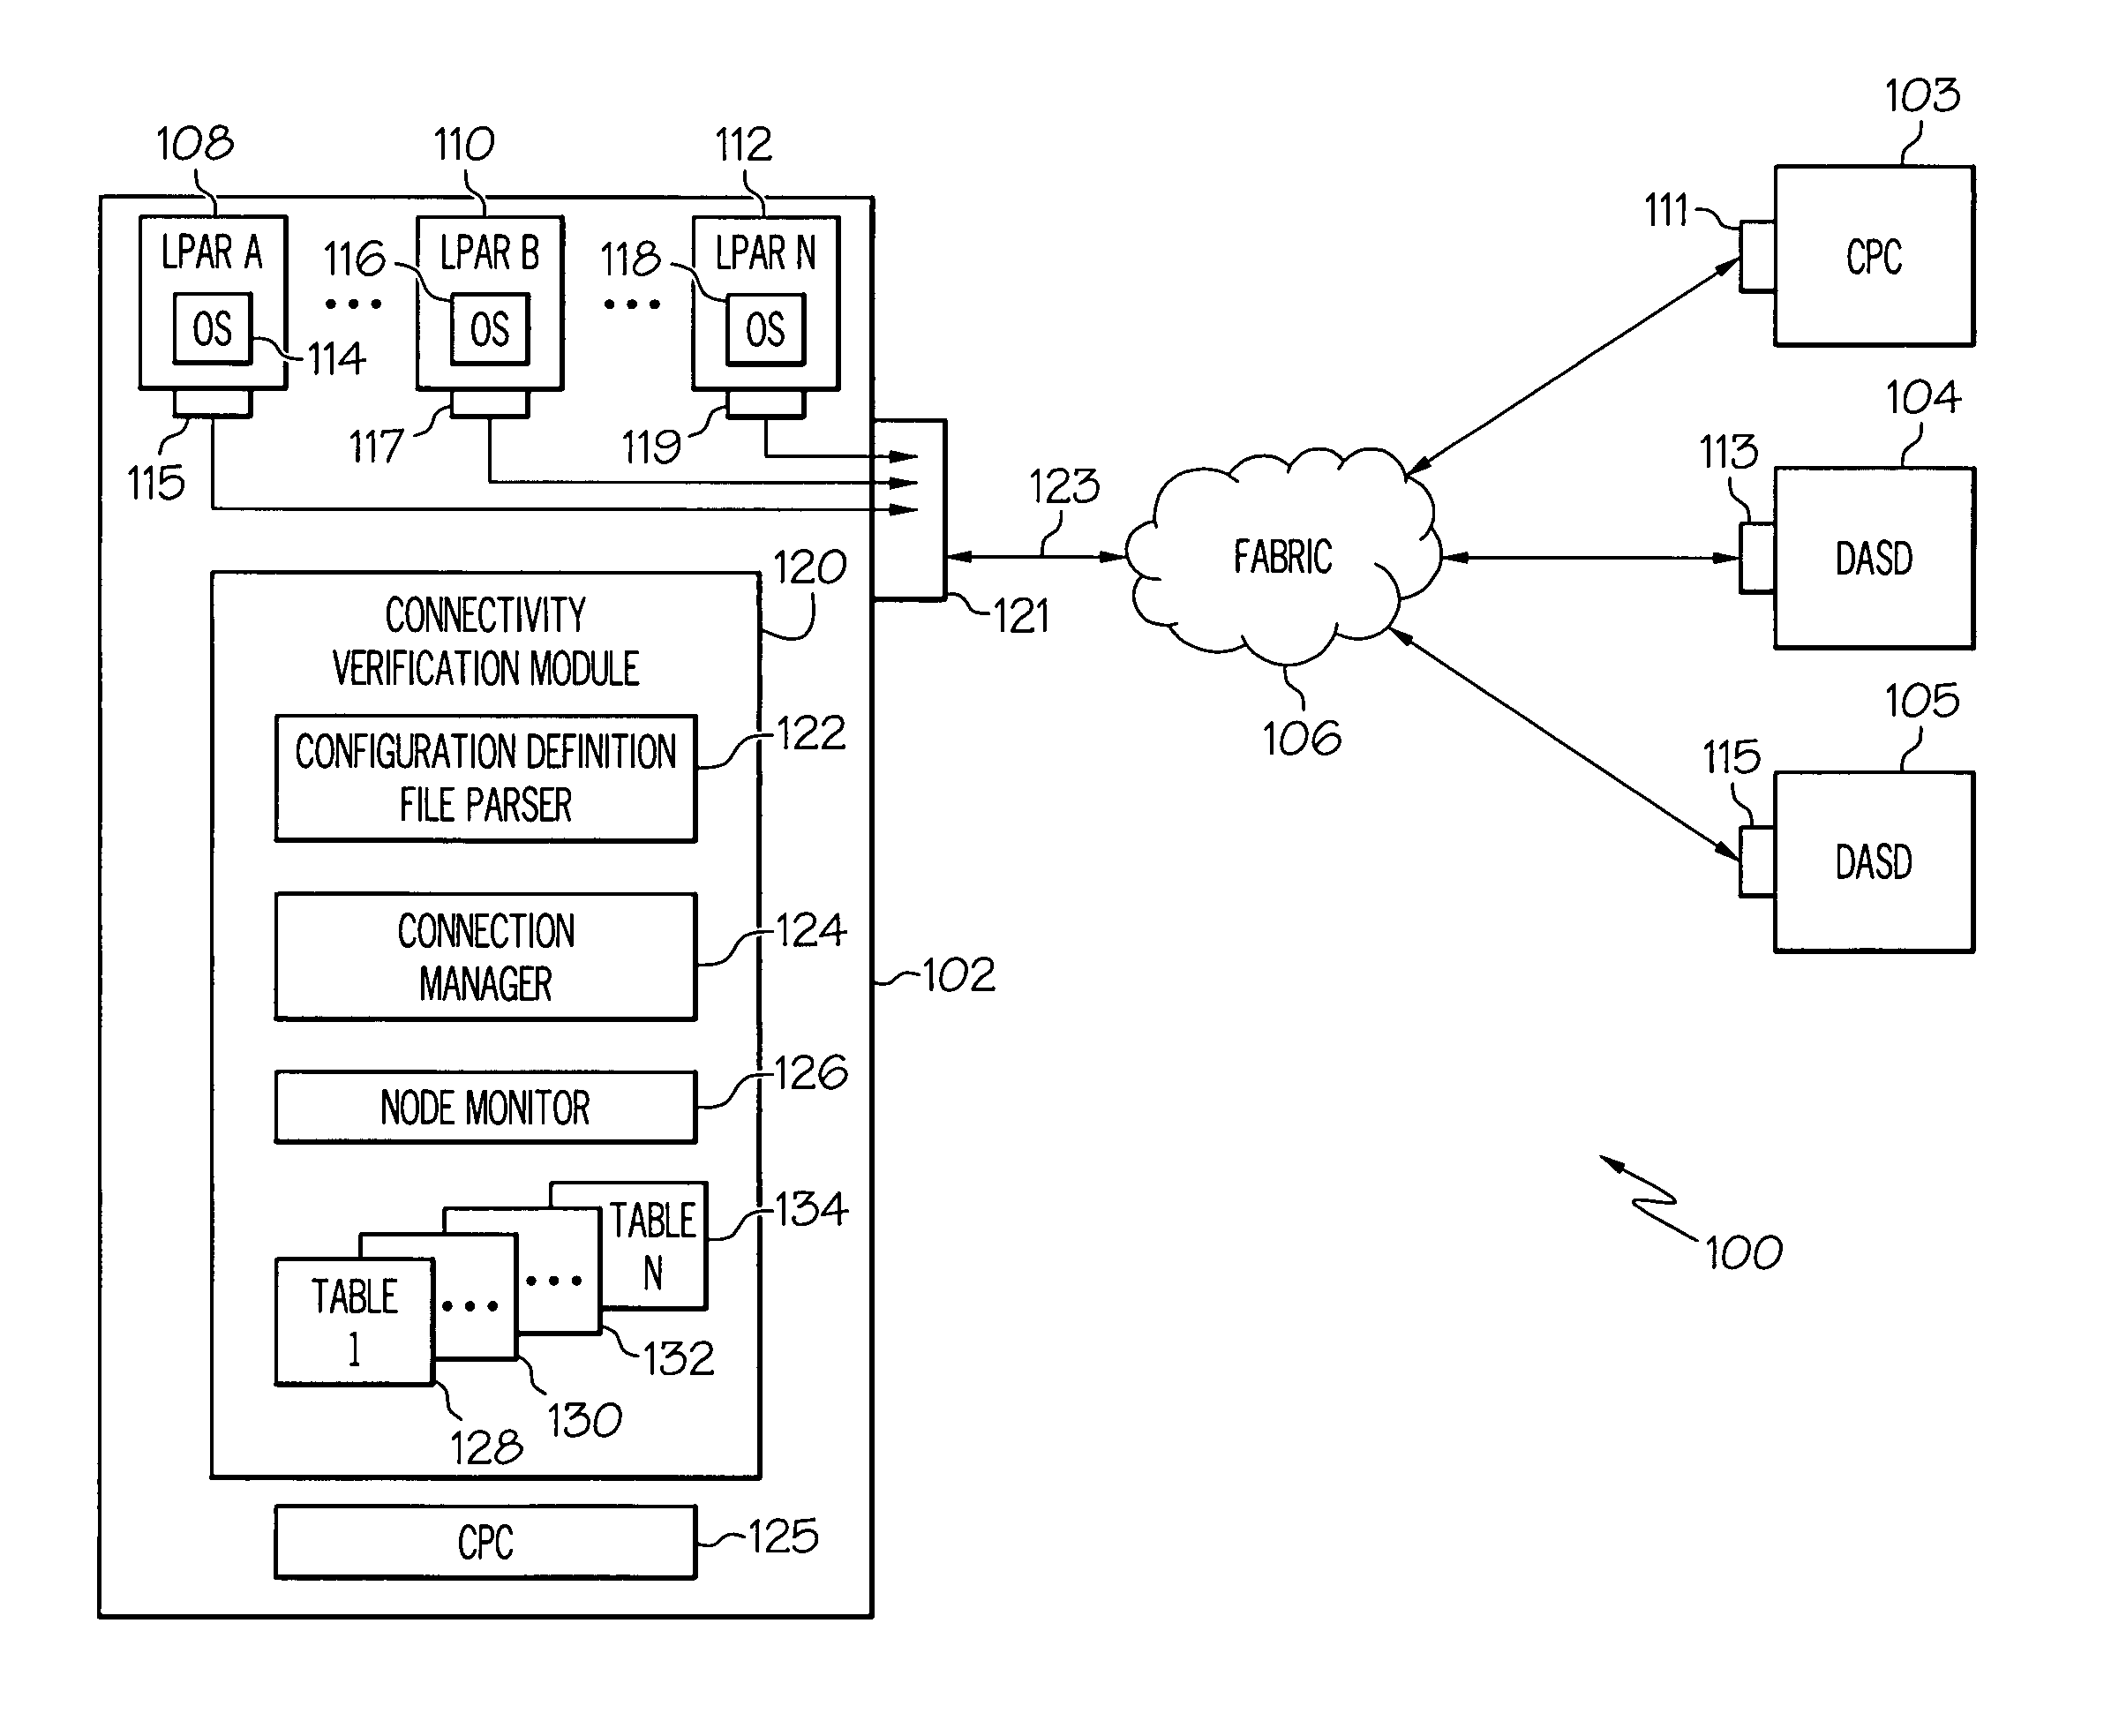 Logical to physical connectivity verification in a predefined networking environment